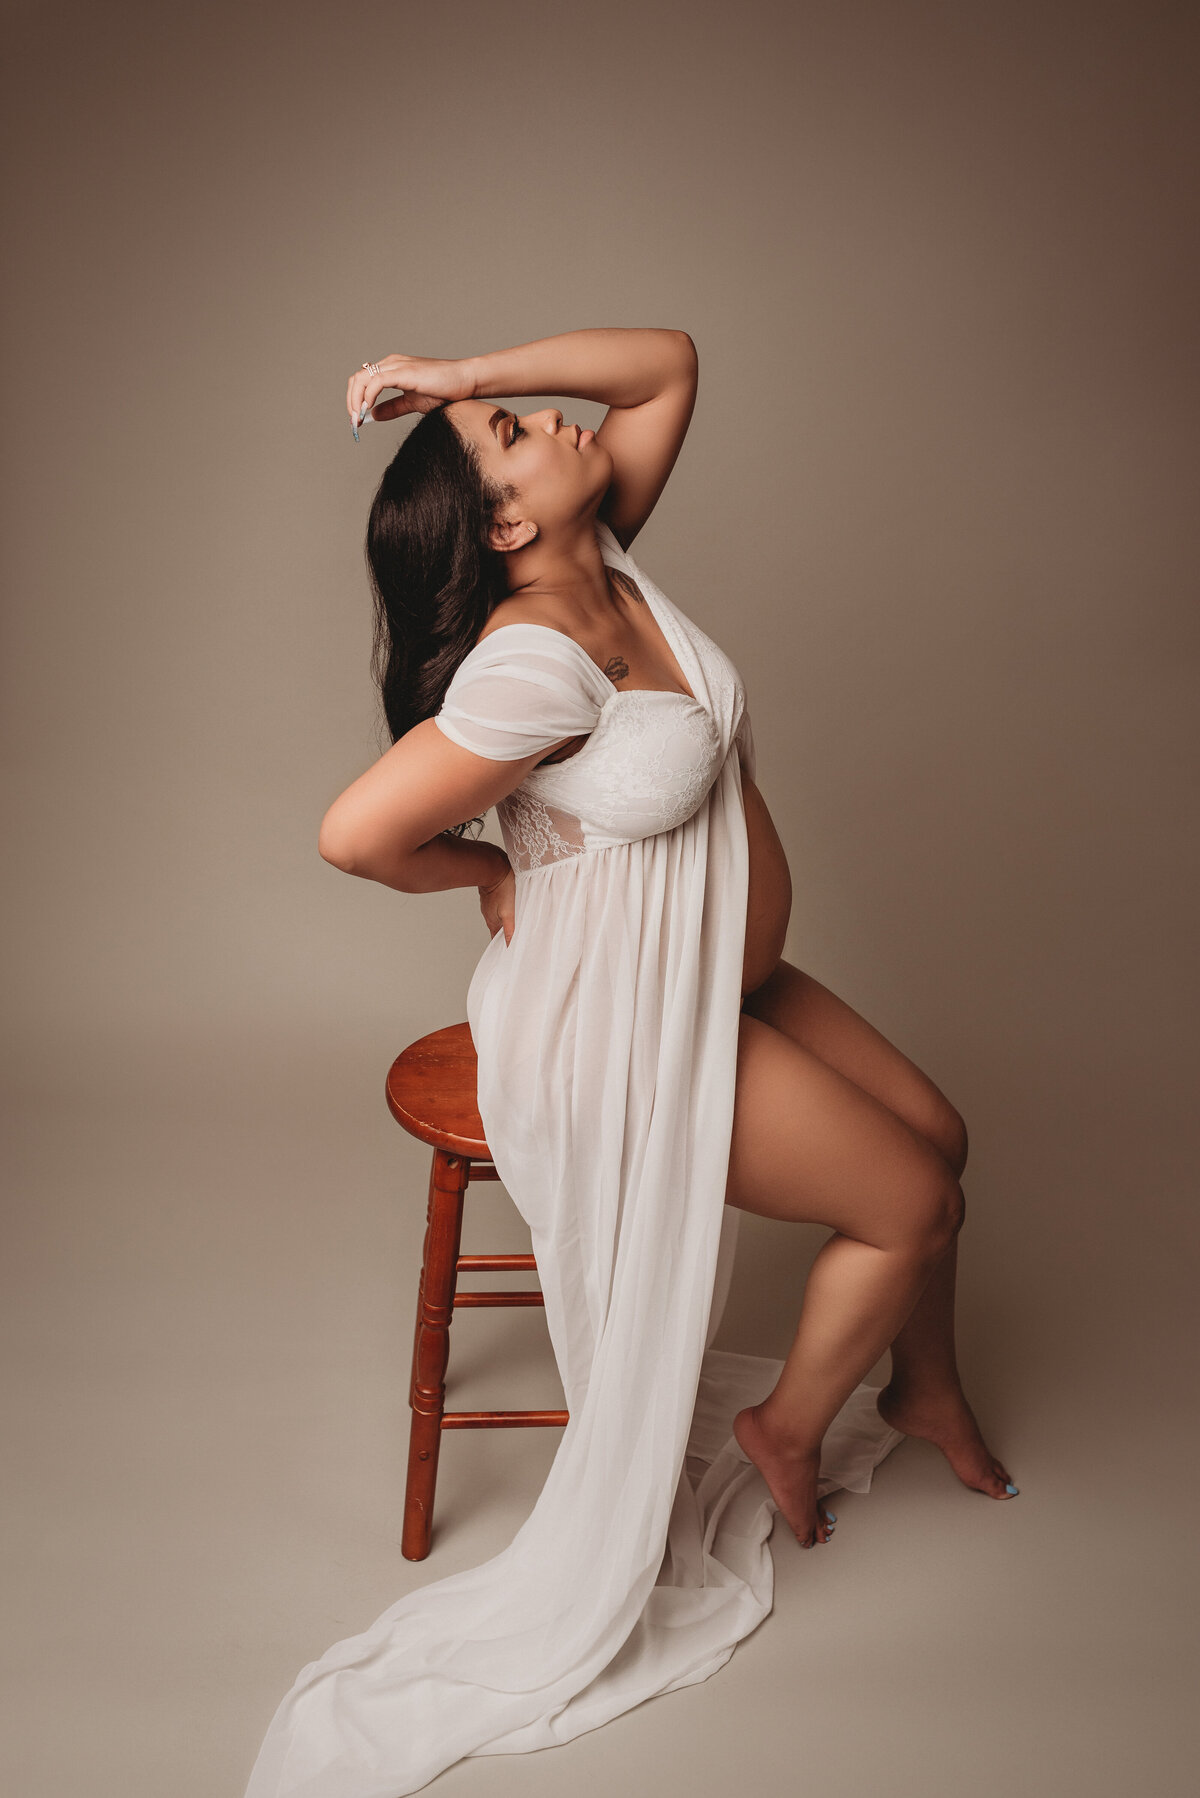 Pregnant woman in open white sheer dress exposing her belly sitting on a stool with hand on head